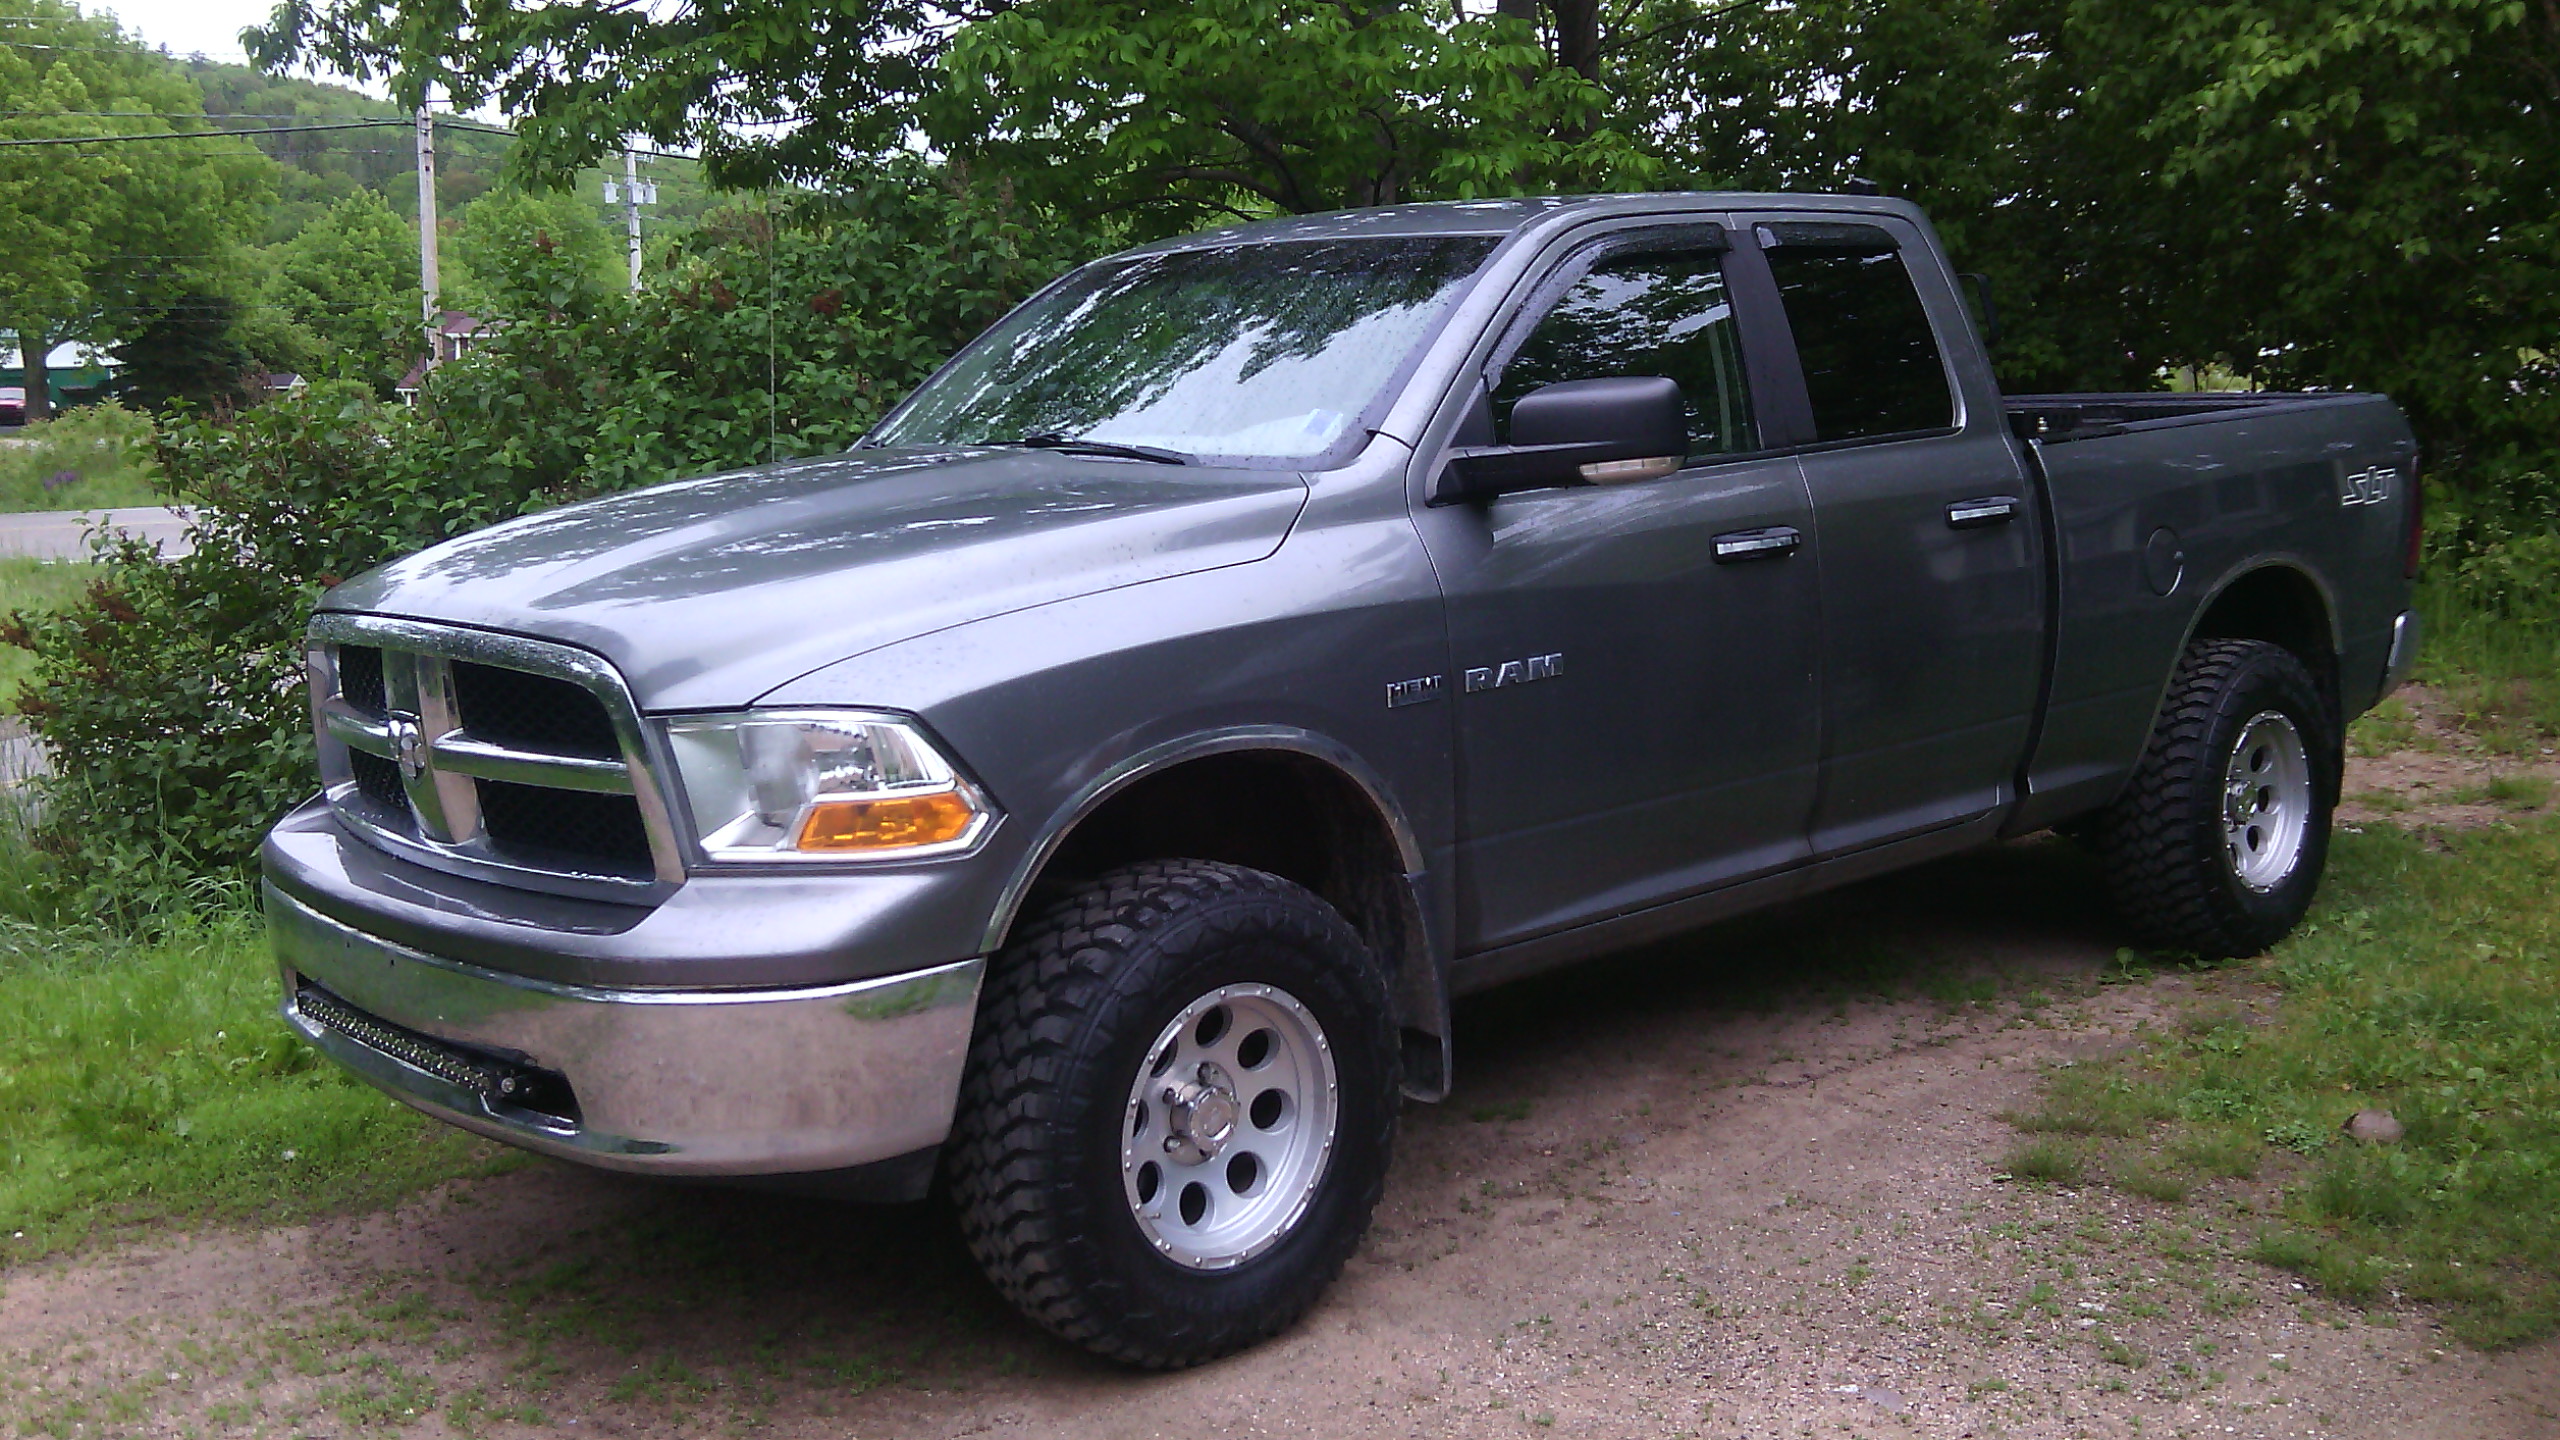 I’m considering getting a set of 4th gen wheels for my 2006 ram 2500 ctd